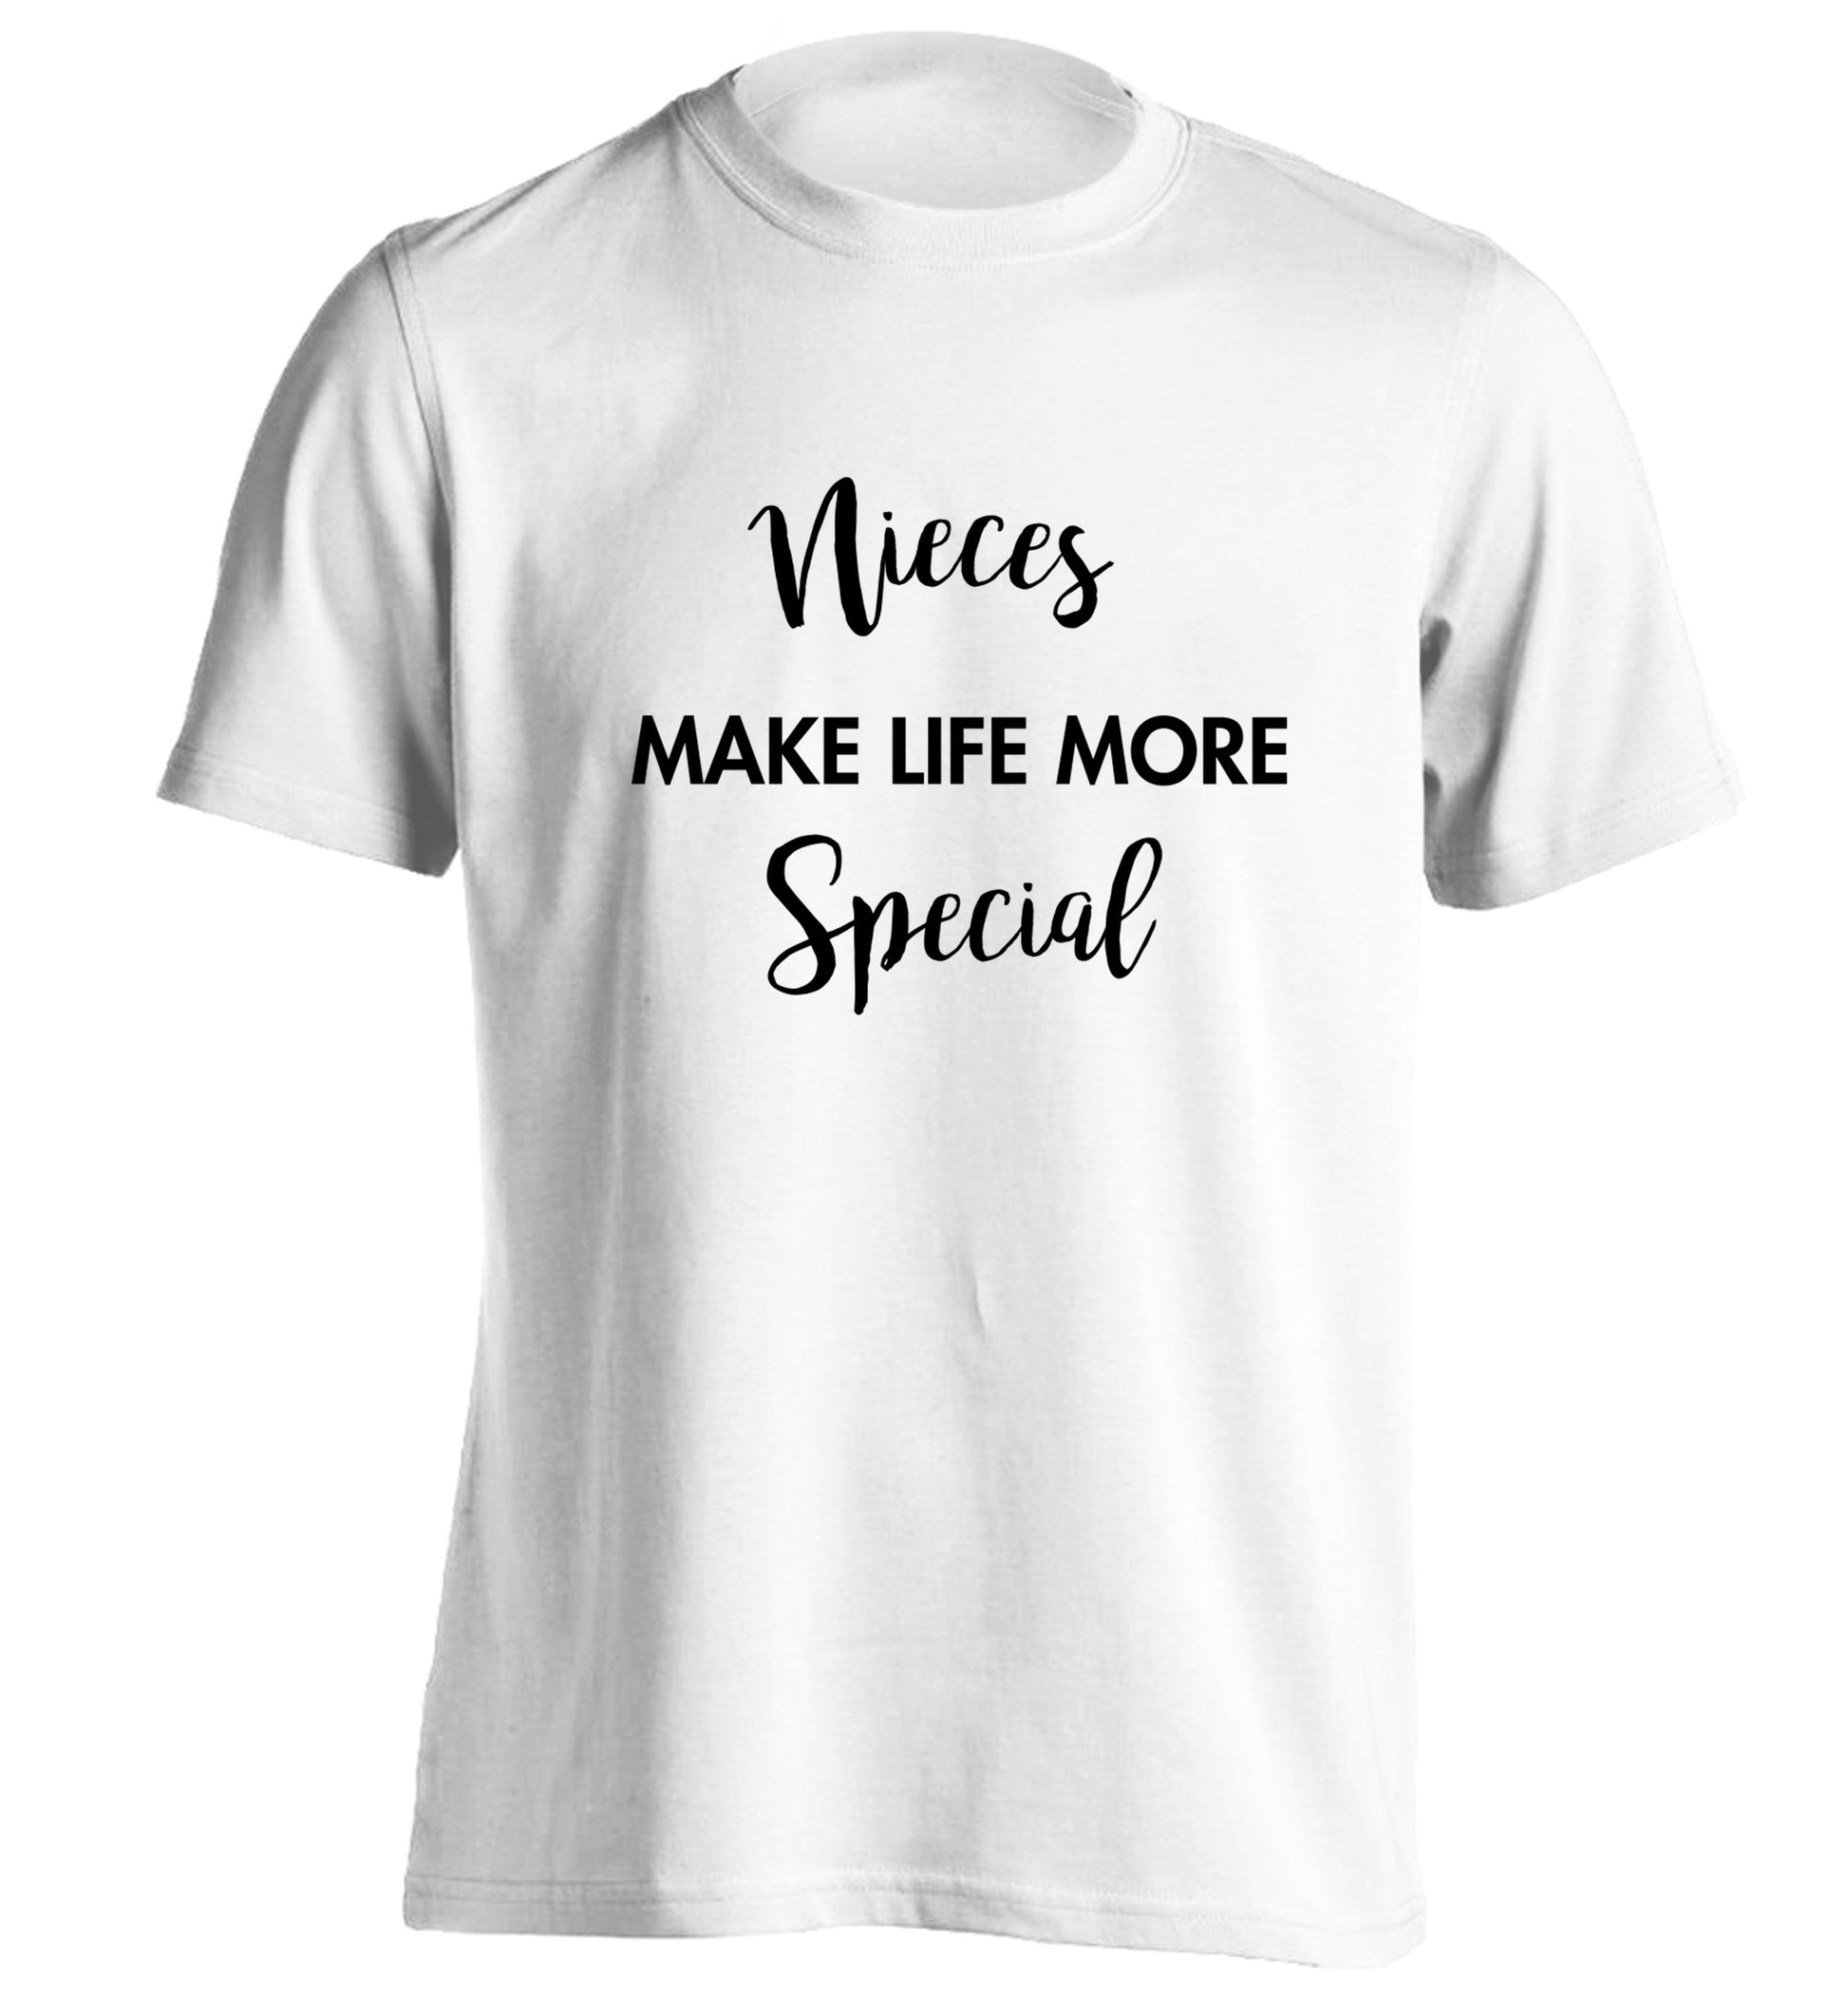 Nieces make life more special adults unisex white Tshirt 2XL